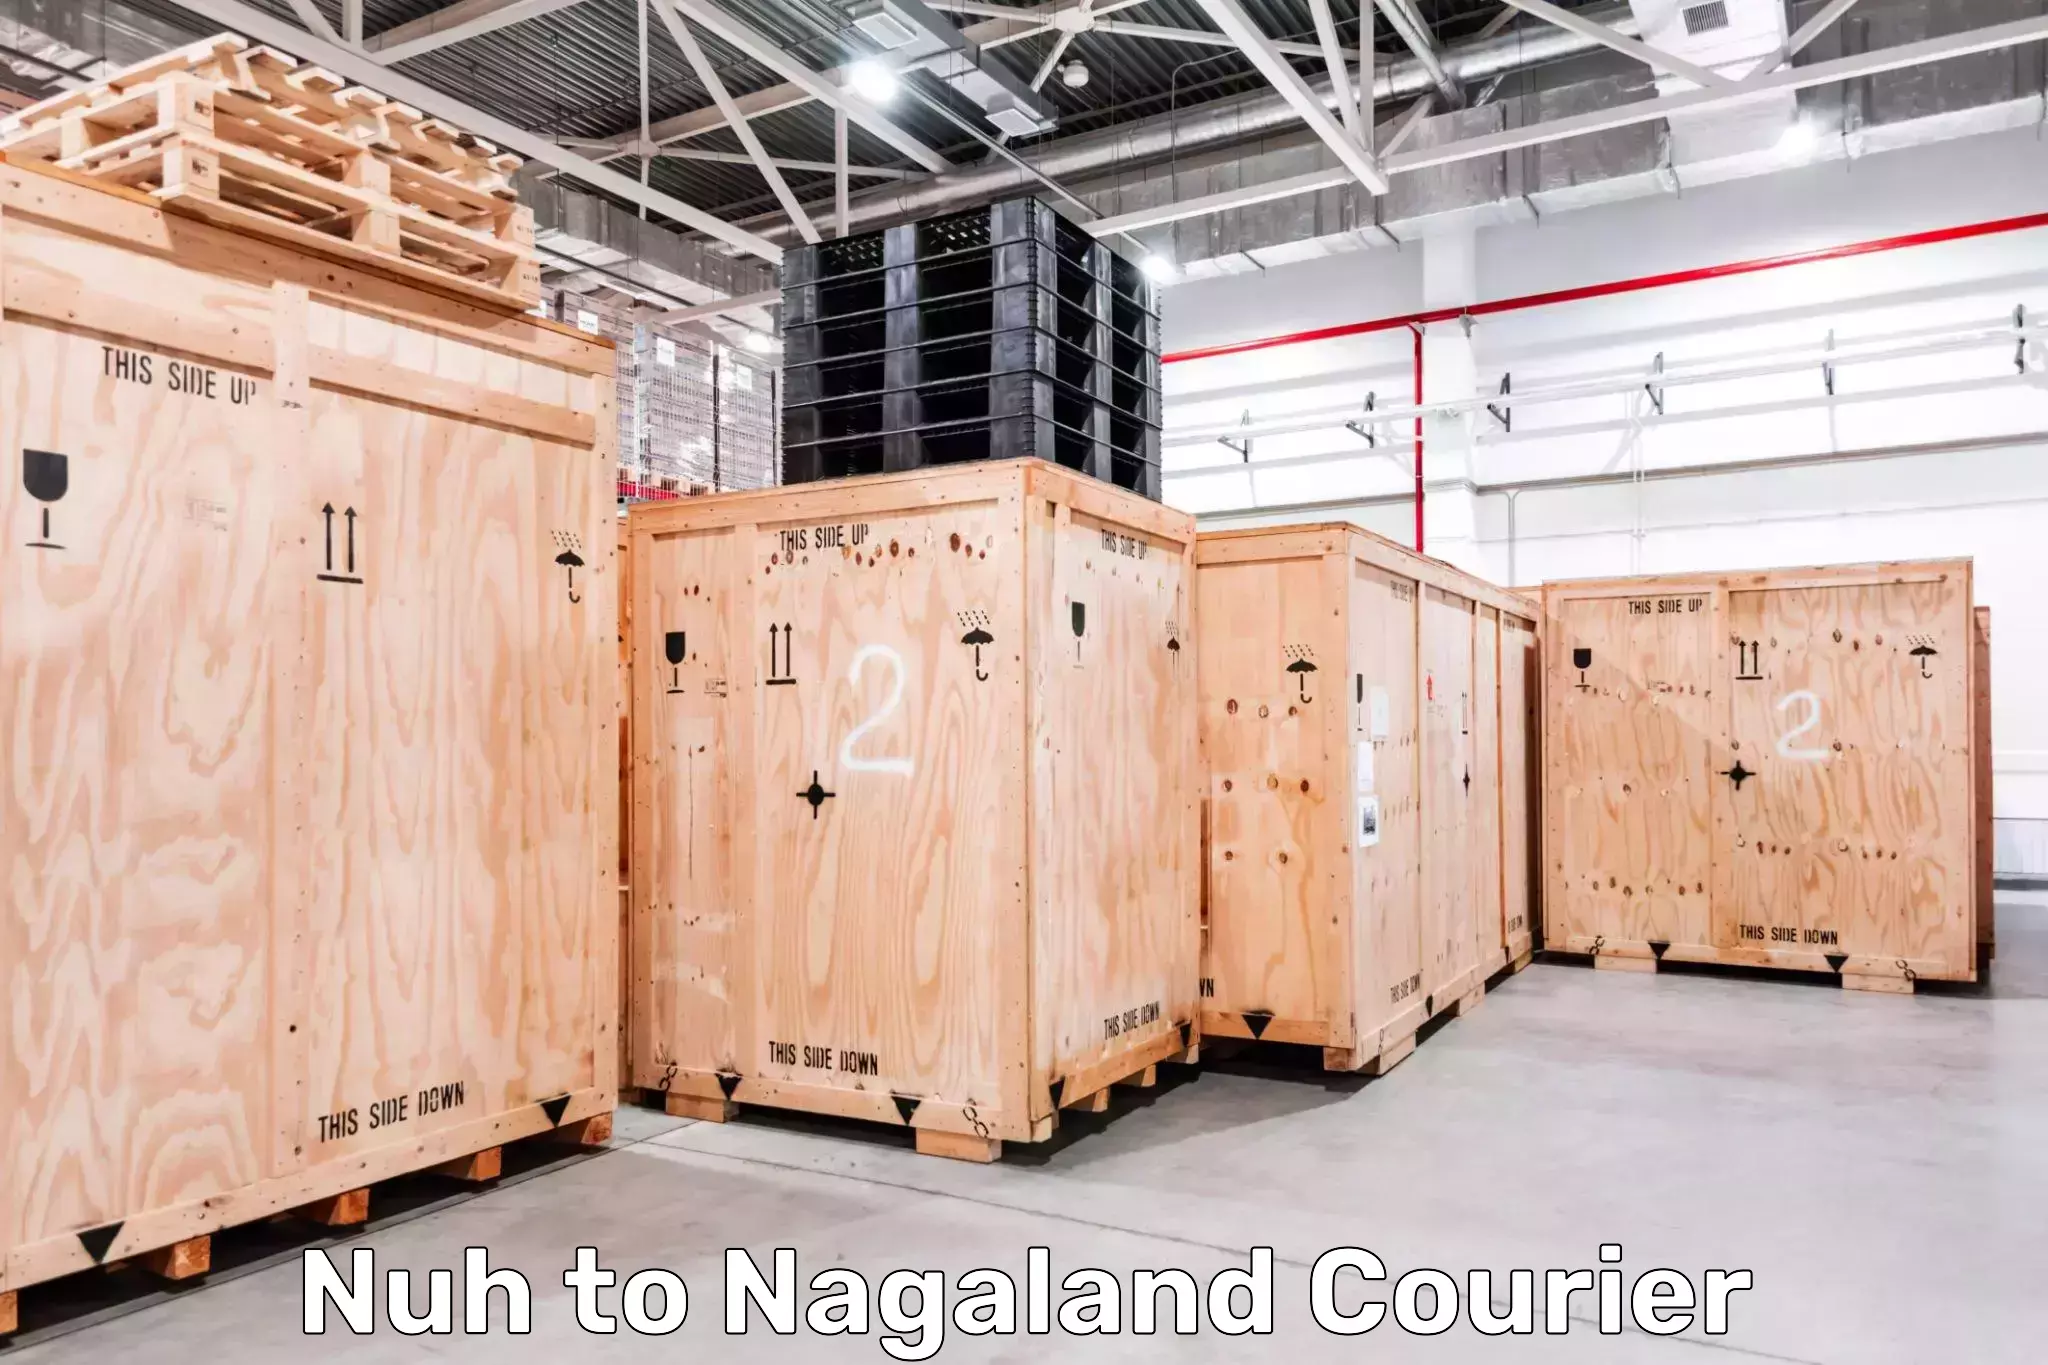 Enhanced delivery experience Nuh to Nagaland